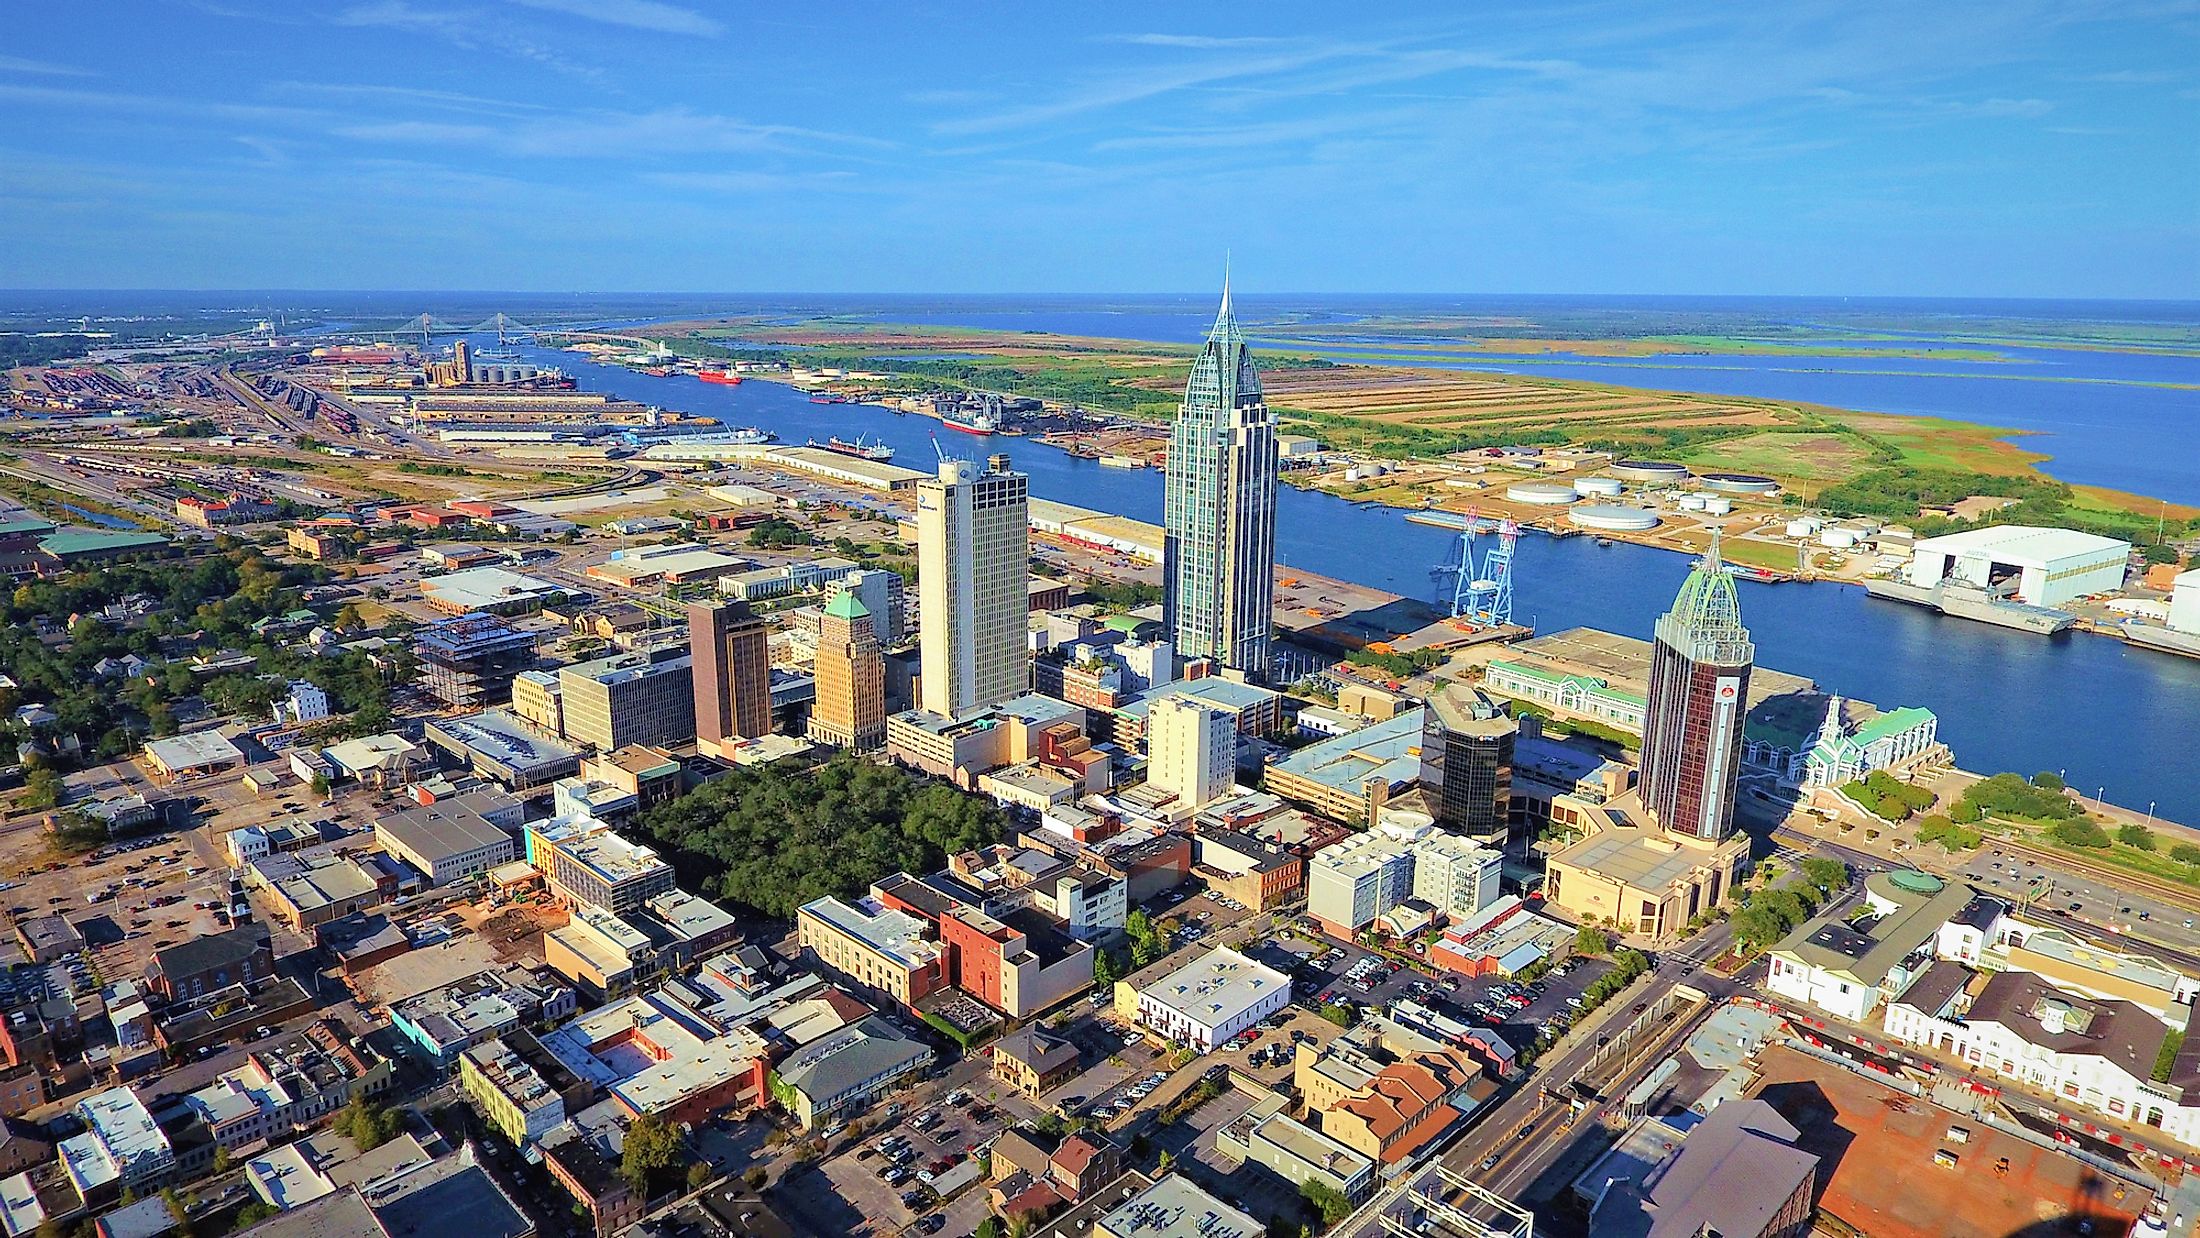 Aerial view of Mobile, Alabama.